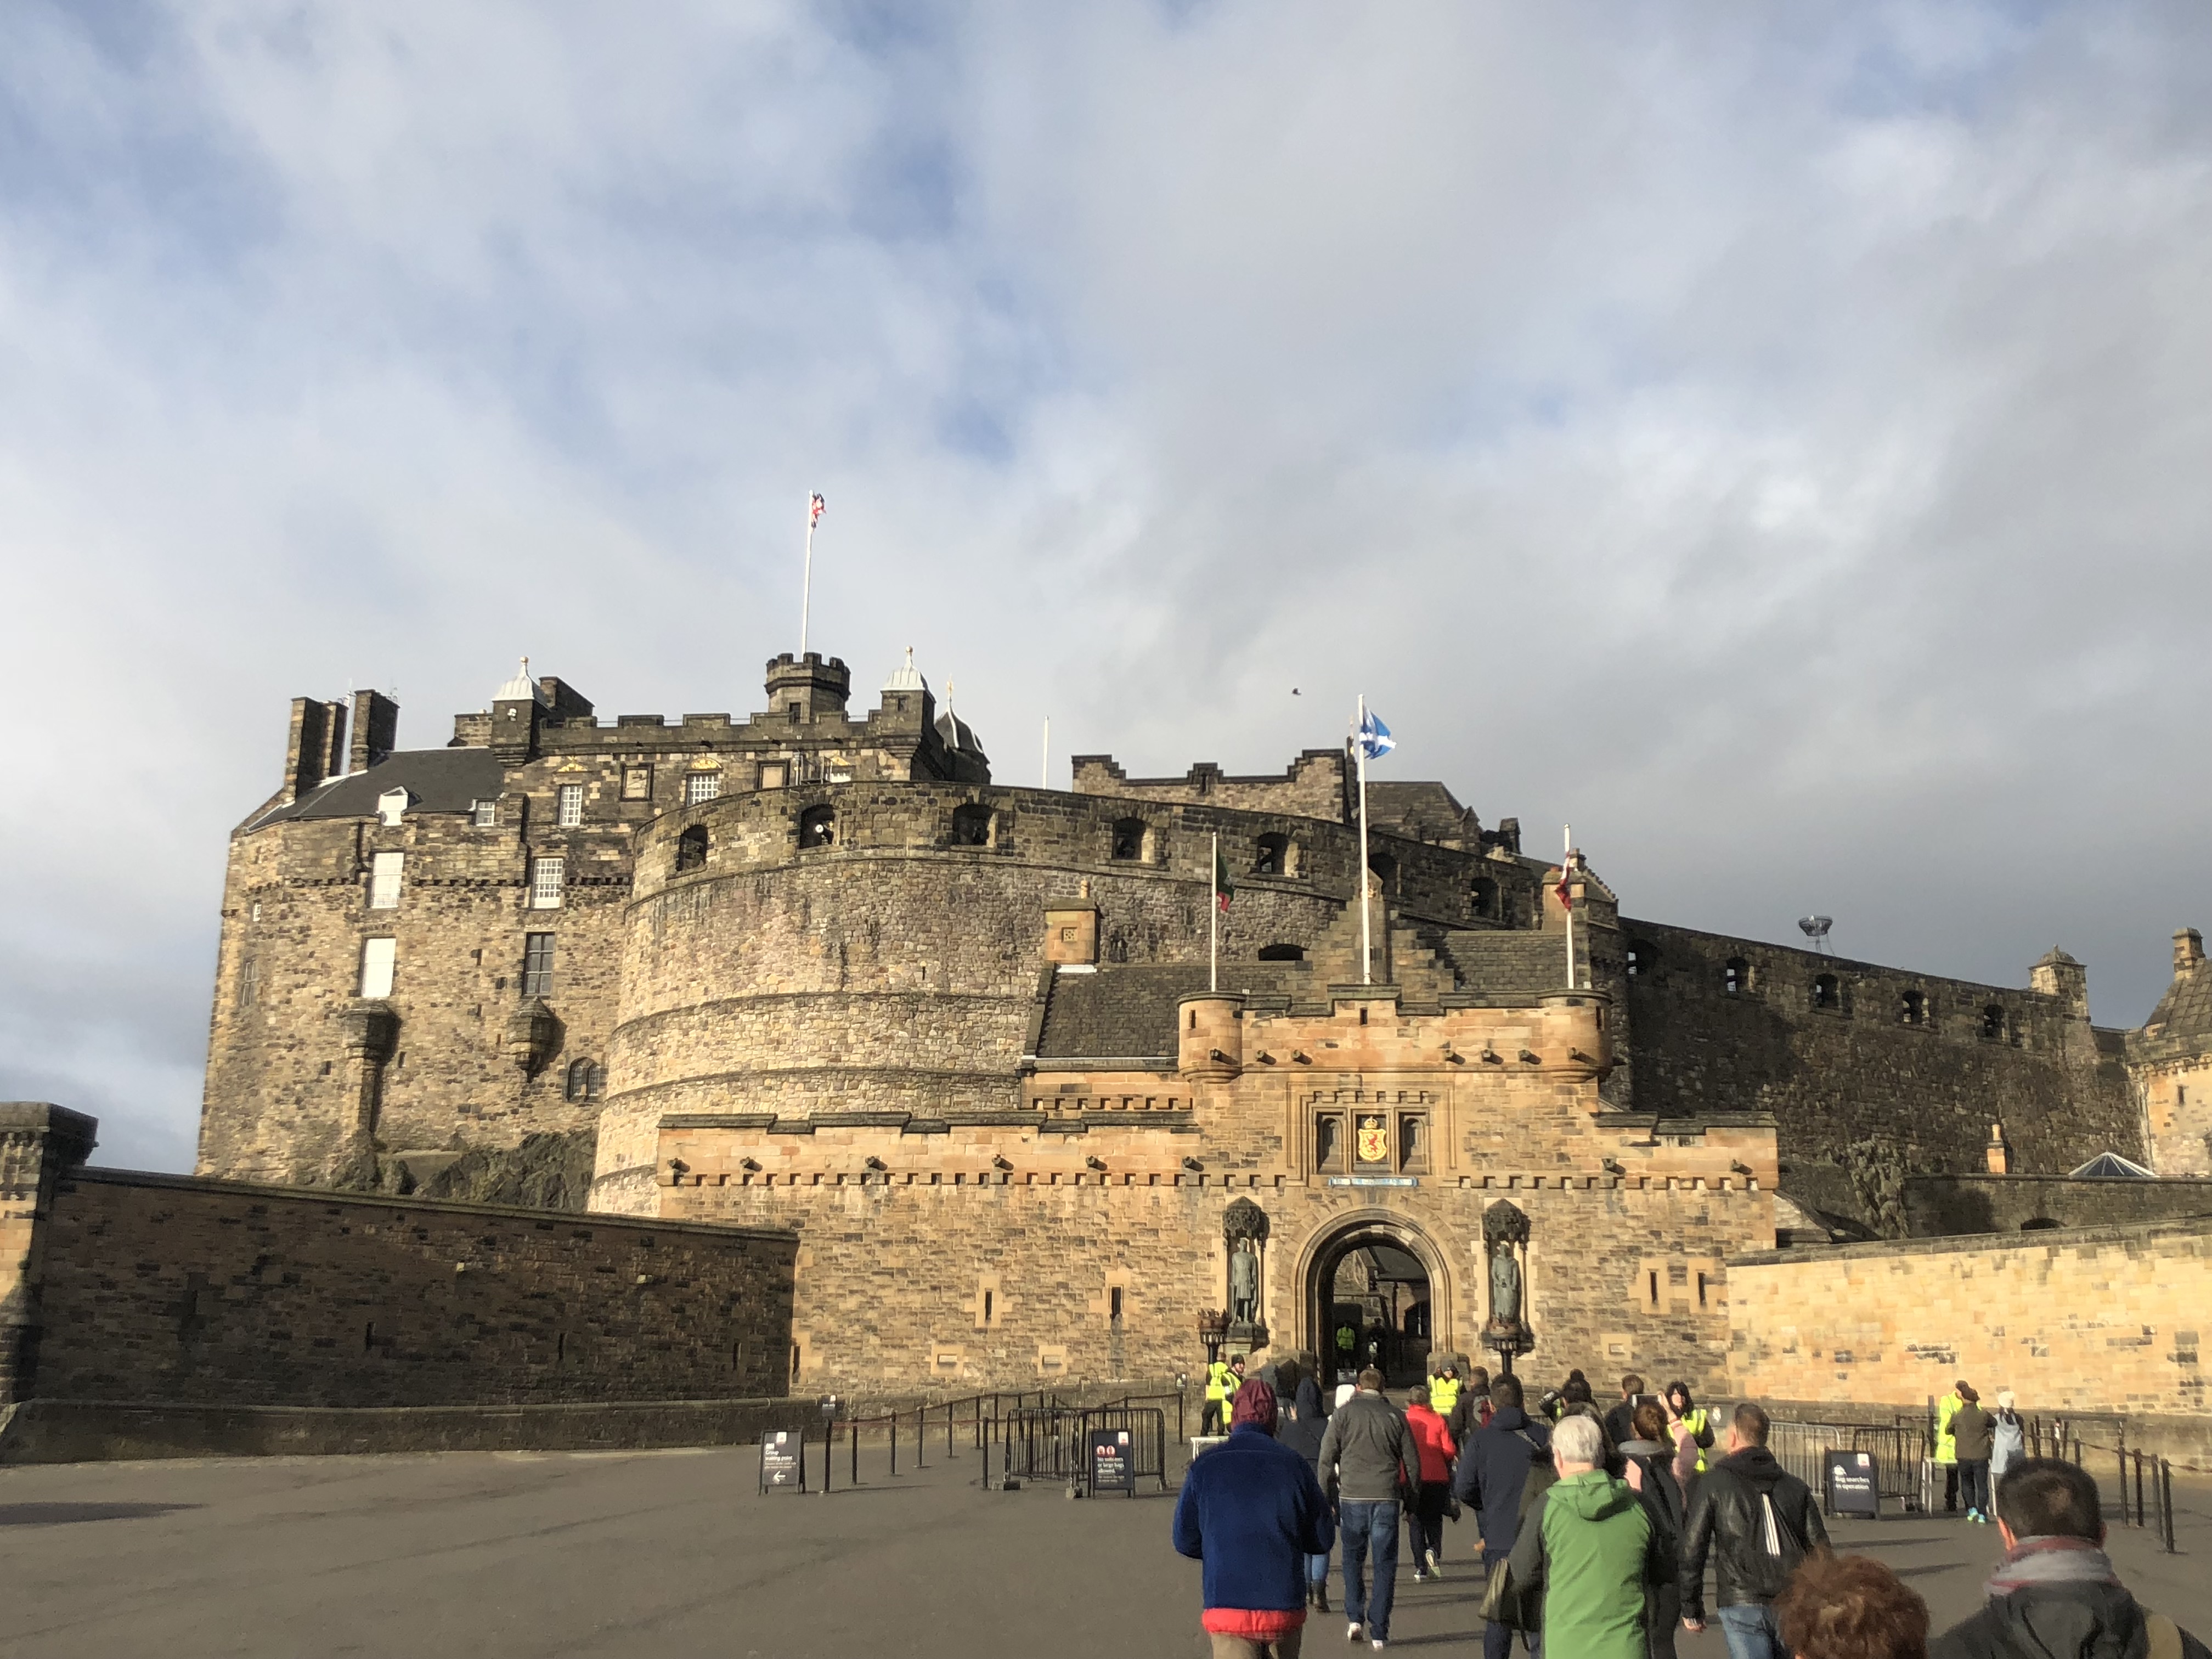 The Top Ten Places To Visit In Edinburgh, Scotland - Chaotically Yours